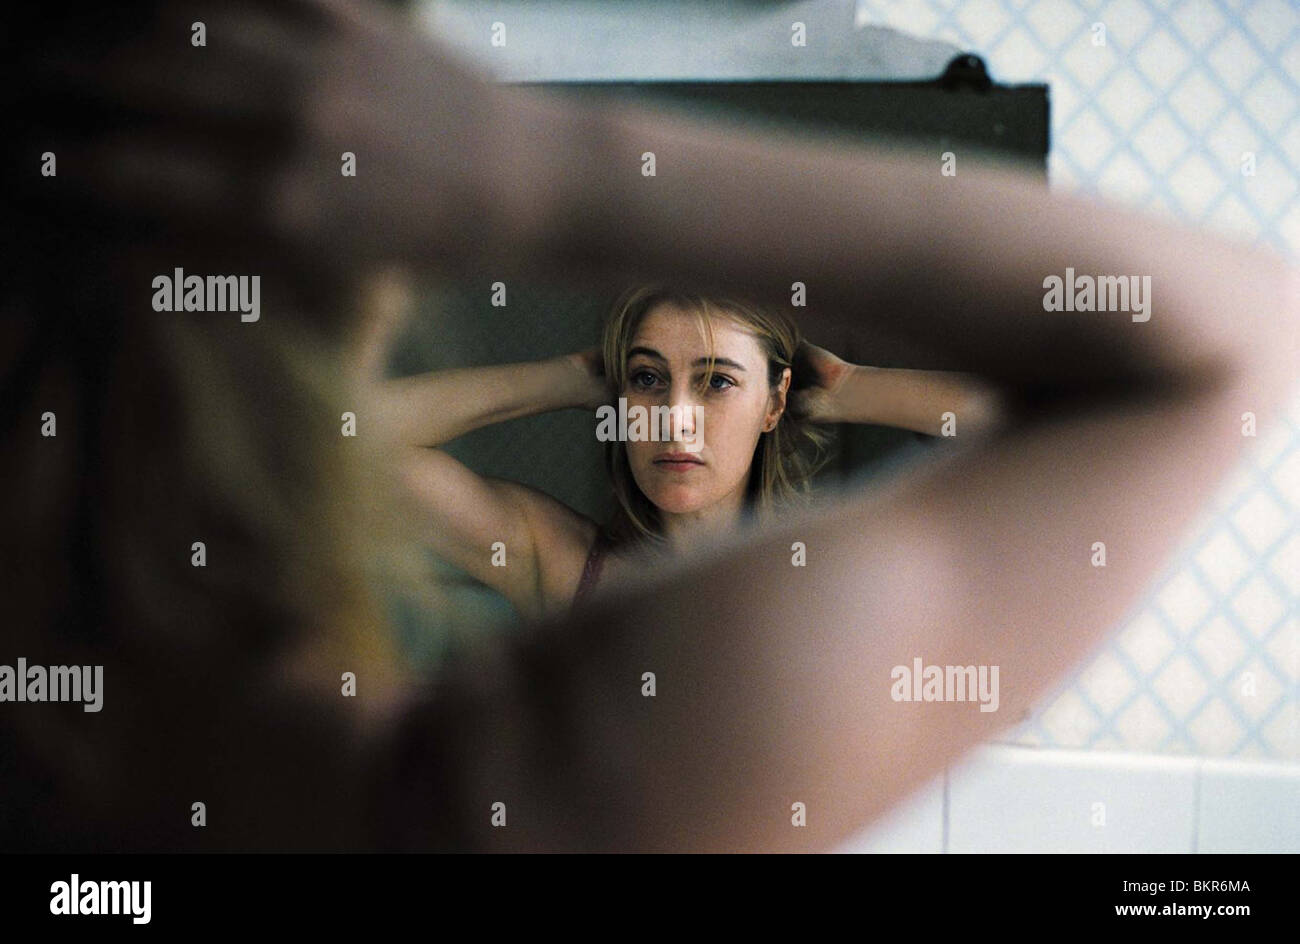 Ligatie zweep Nauwgezet Stephane Freiss Francois Ozon Dir 5x2 004 Moviestore Collection Ltd High  Resolution Stock Photography and Images - Alamy